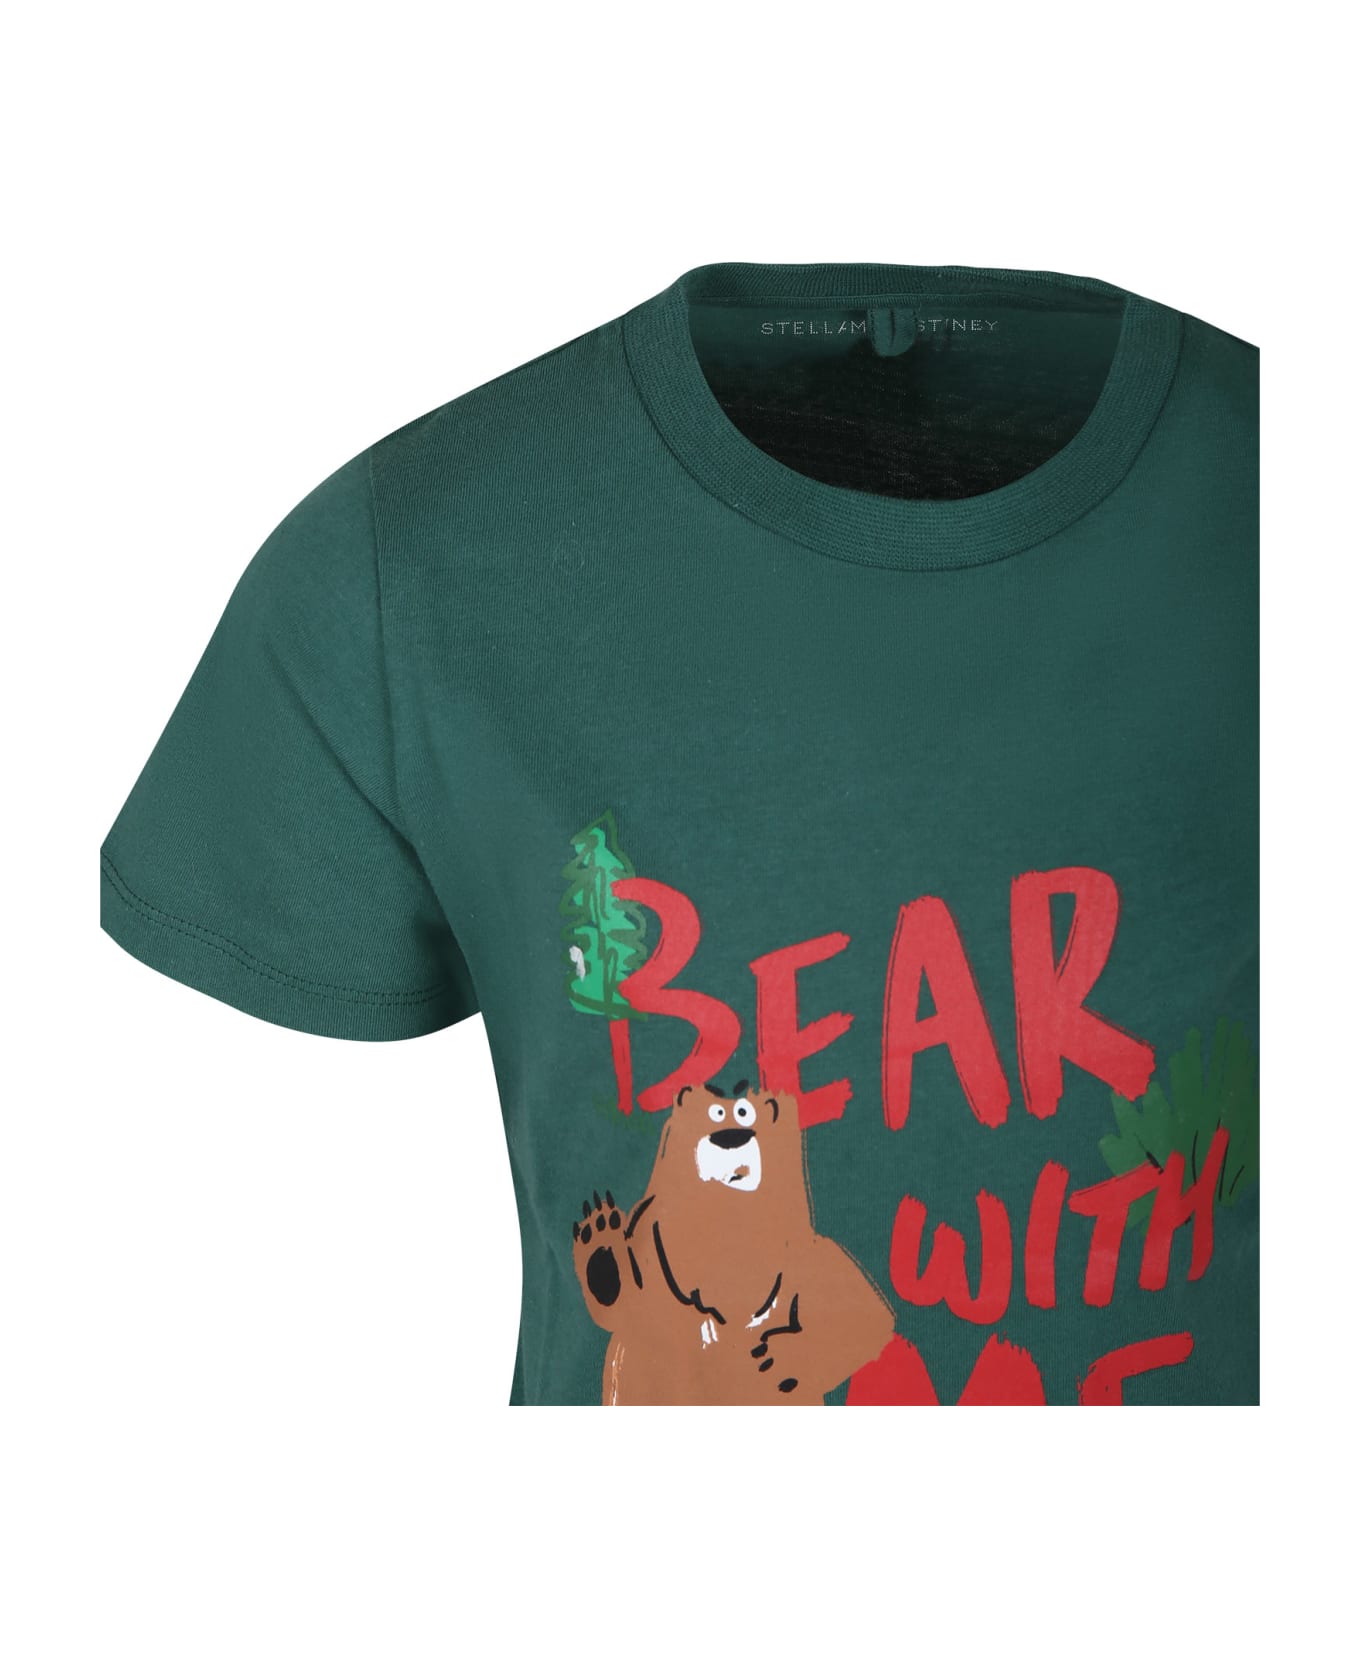 Stella McCartney Kids Green T-shirt For Boy With Bear Print And Writing - Green